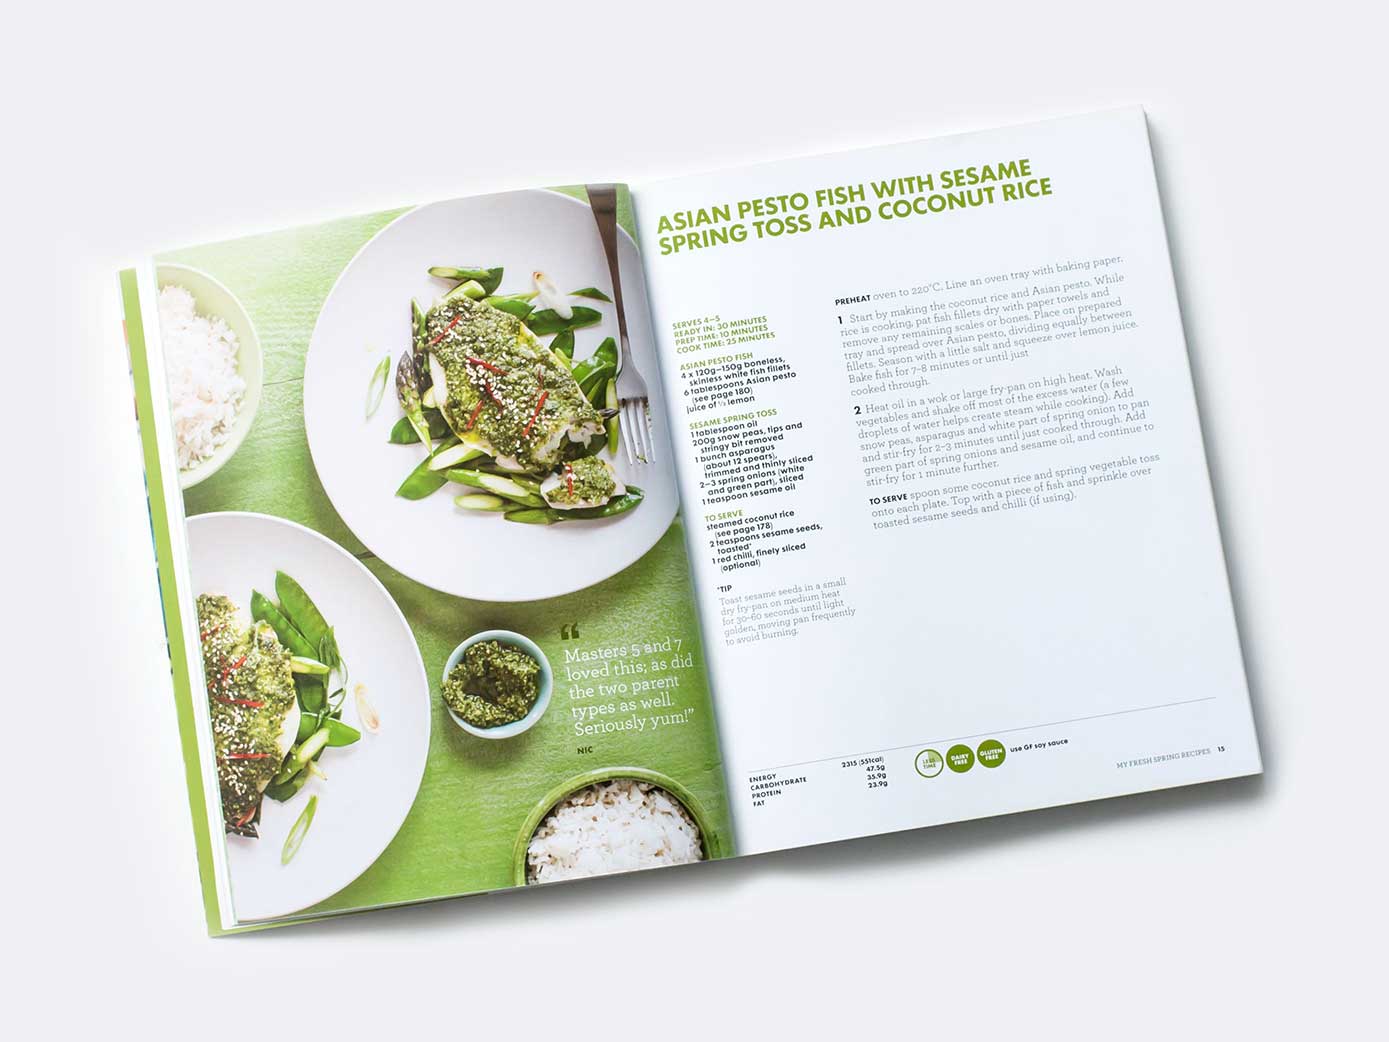 Nadia Lims' Easy Week Night Meals cook book double page spread